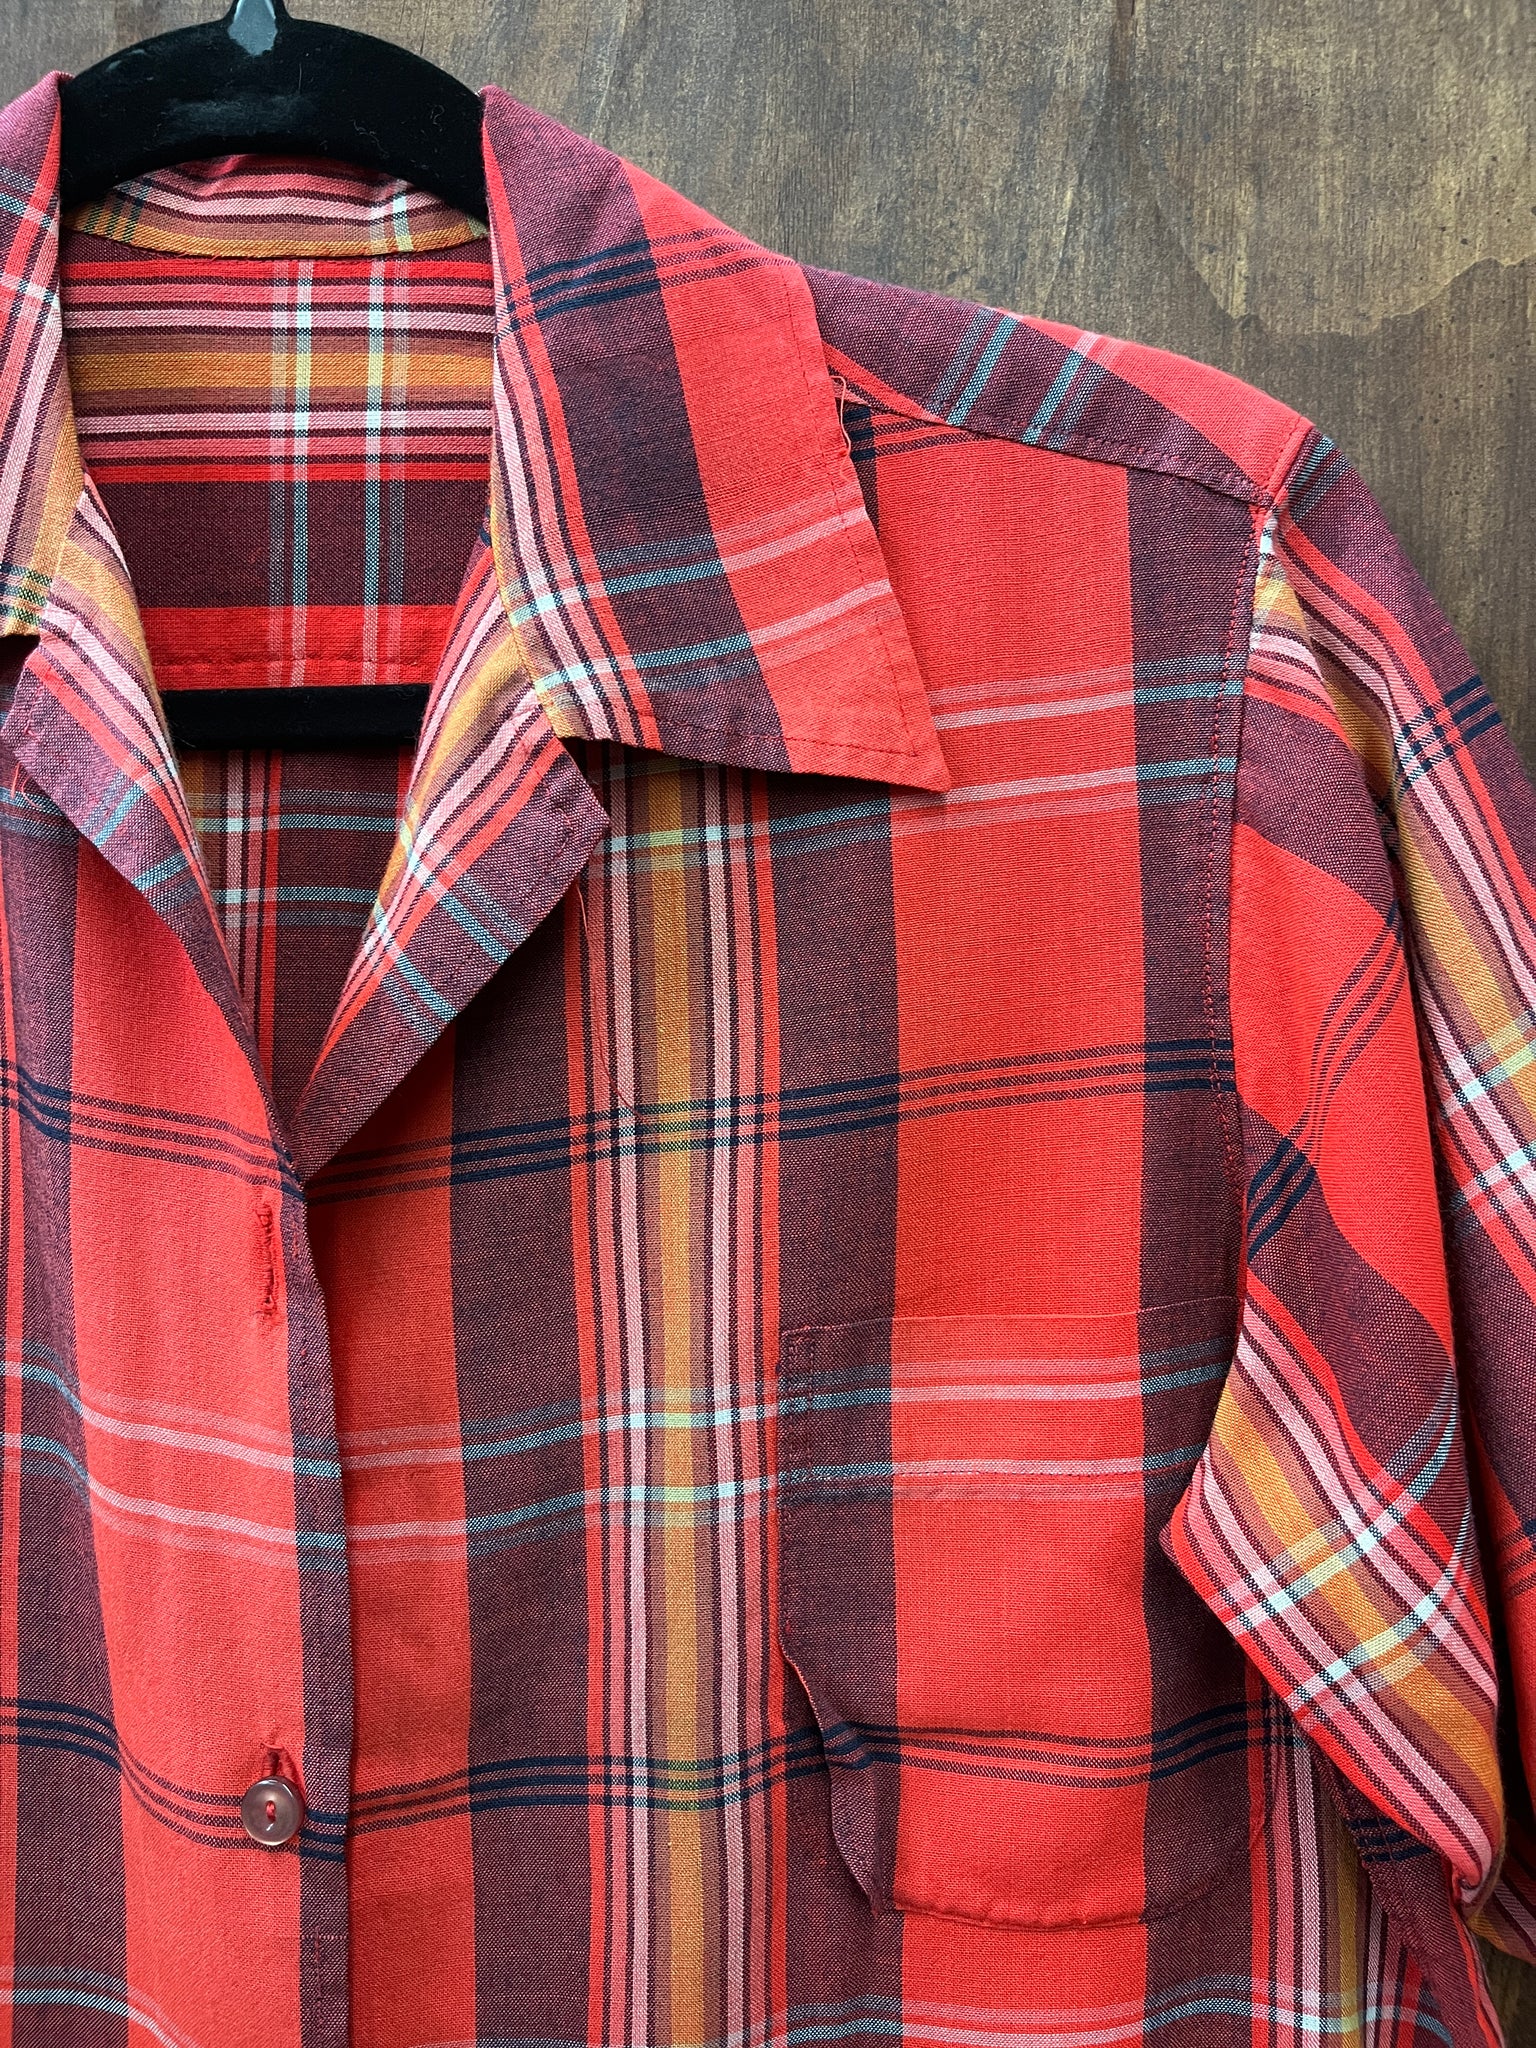 1950s TOP- red plaid camping button up